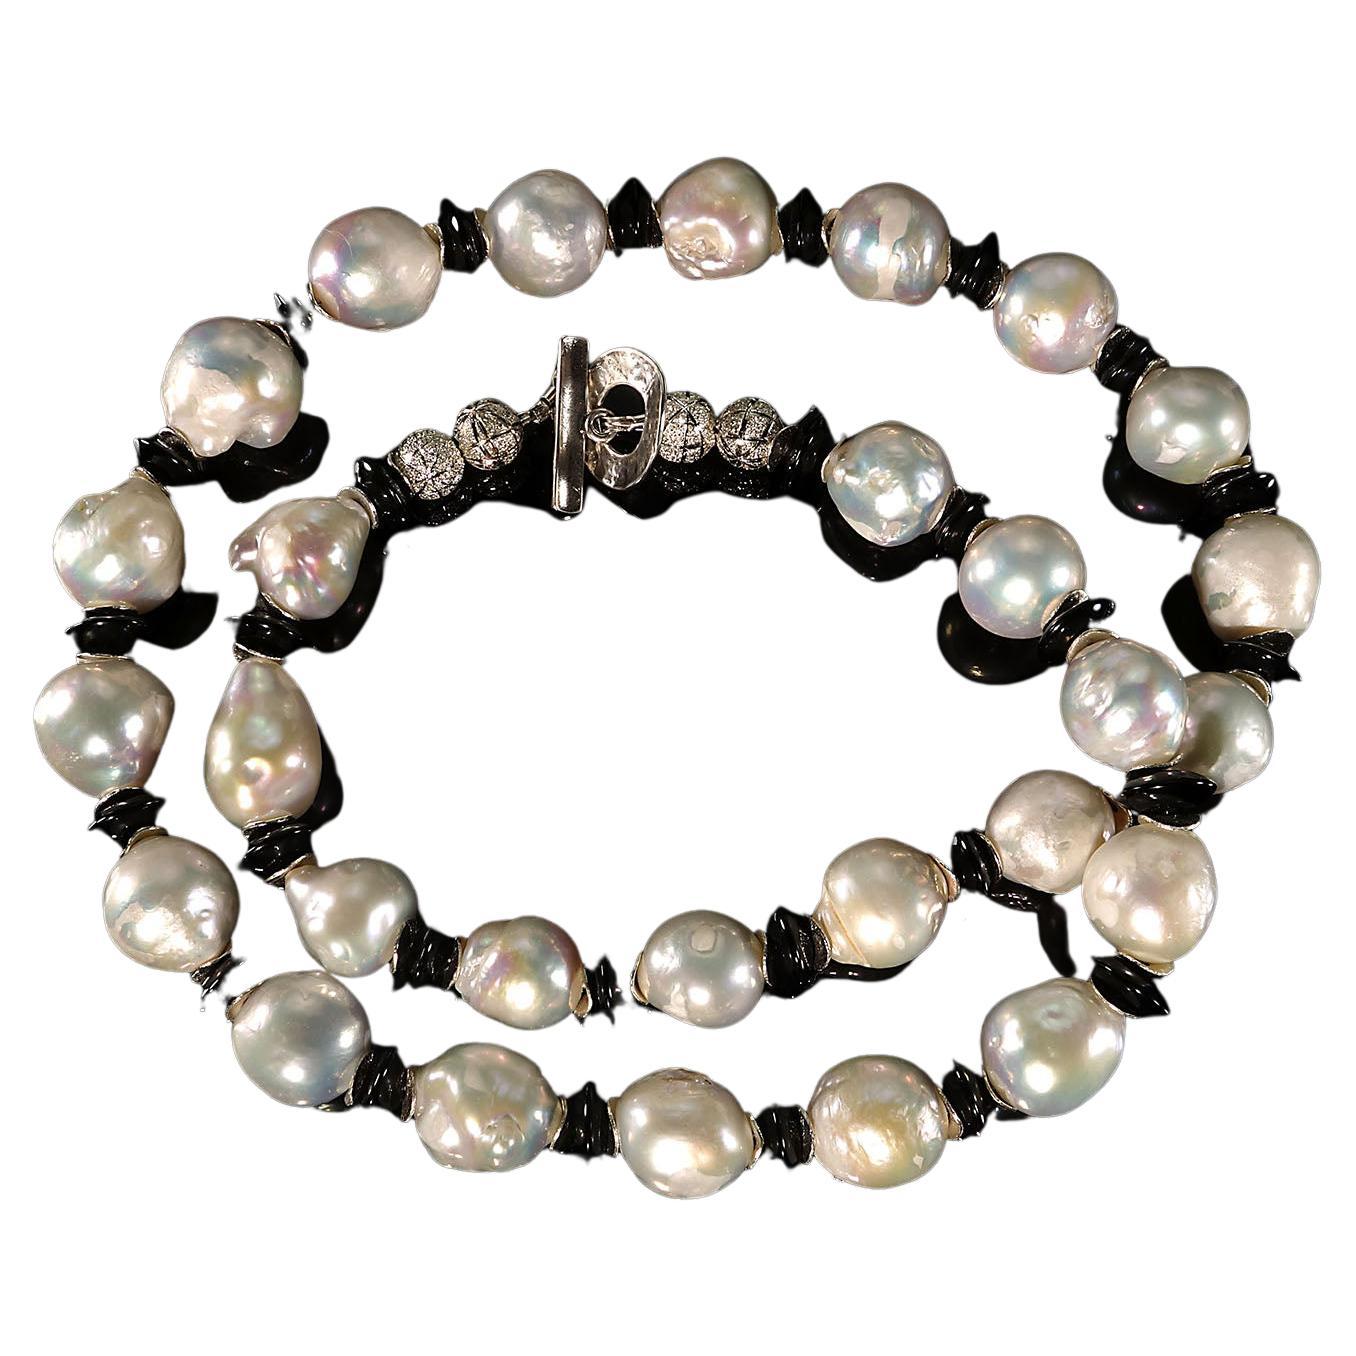 Own the jewelry you wish for

Stunning necklace of white Baroque Pearls and glistening Black Tourmaline rondelles with silver tone flutter accents.  This unique black and white necklace is 25 inches in length and is secured with a Sterling Silver